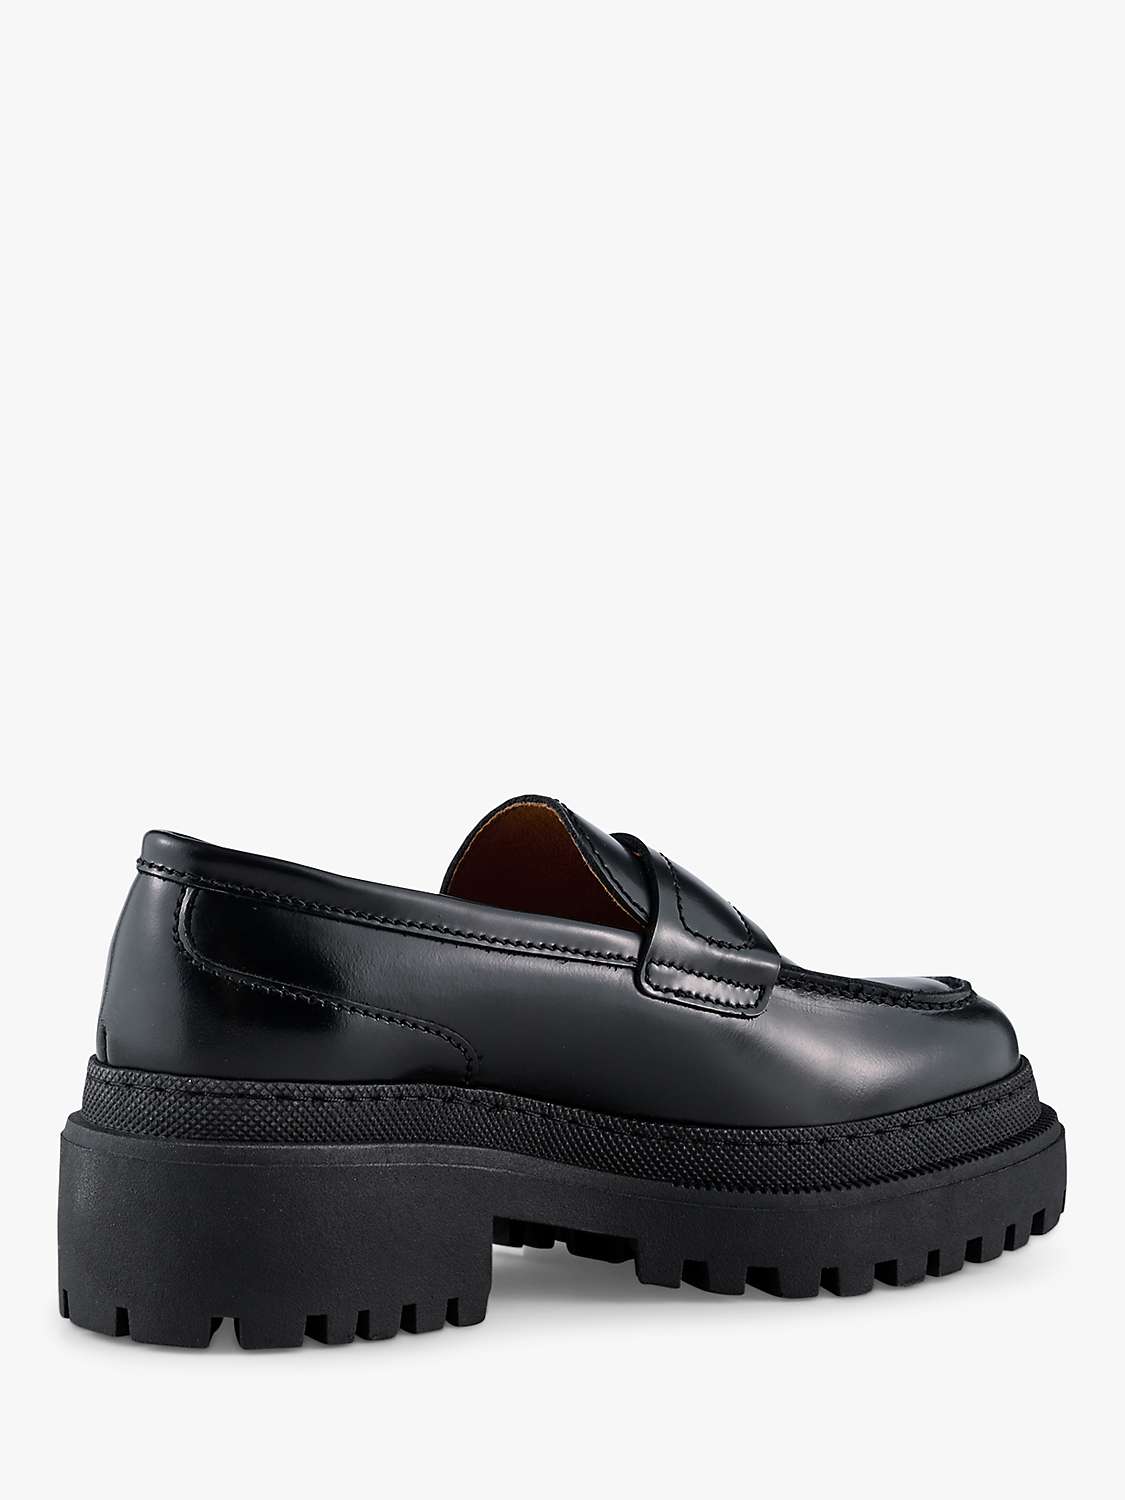 SHOE THE BEAR Iona Leather Loafers, Black at John Lewis & Partners